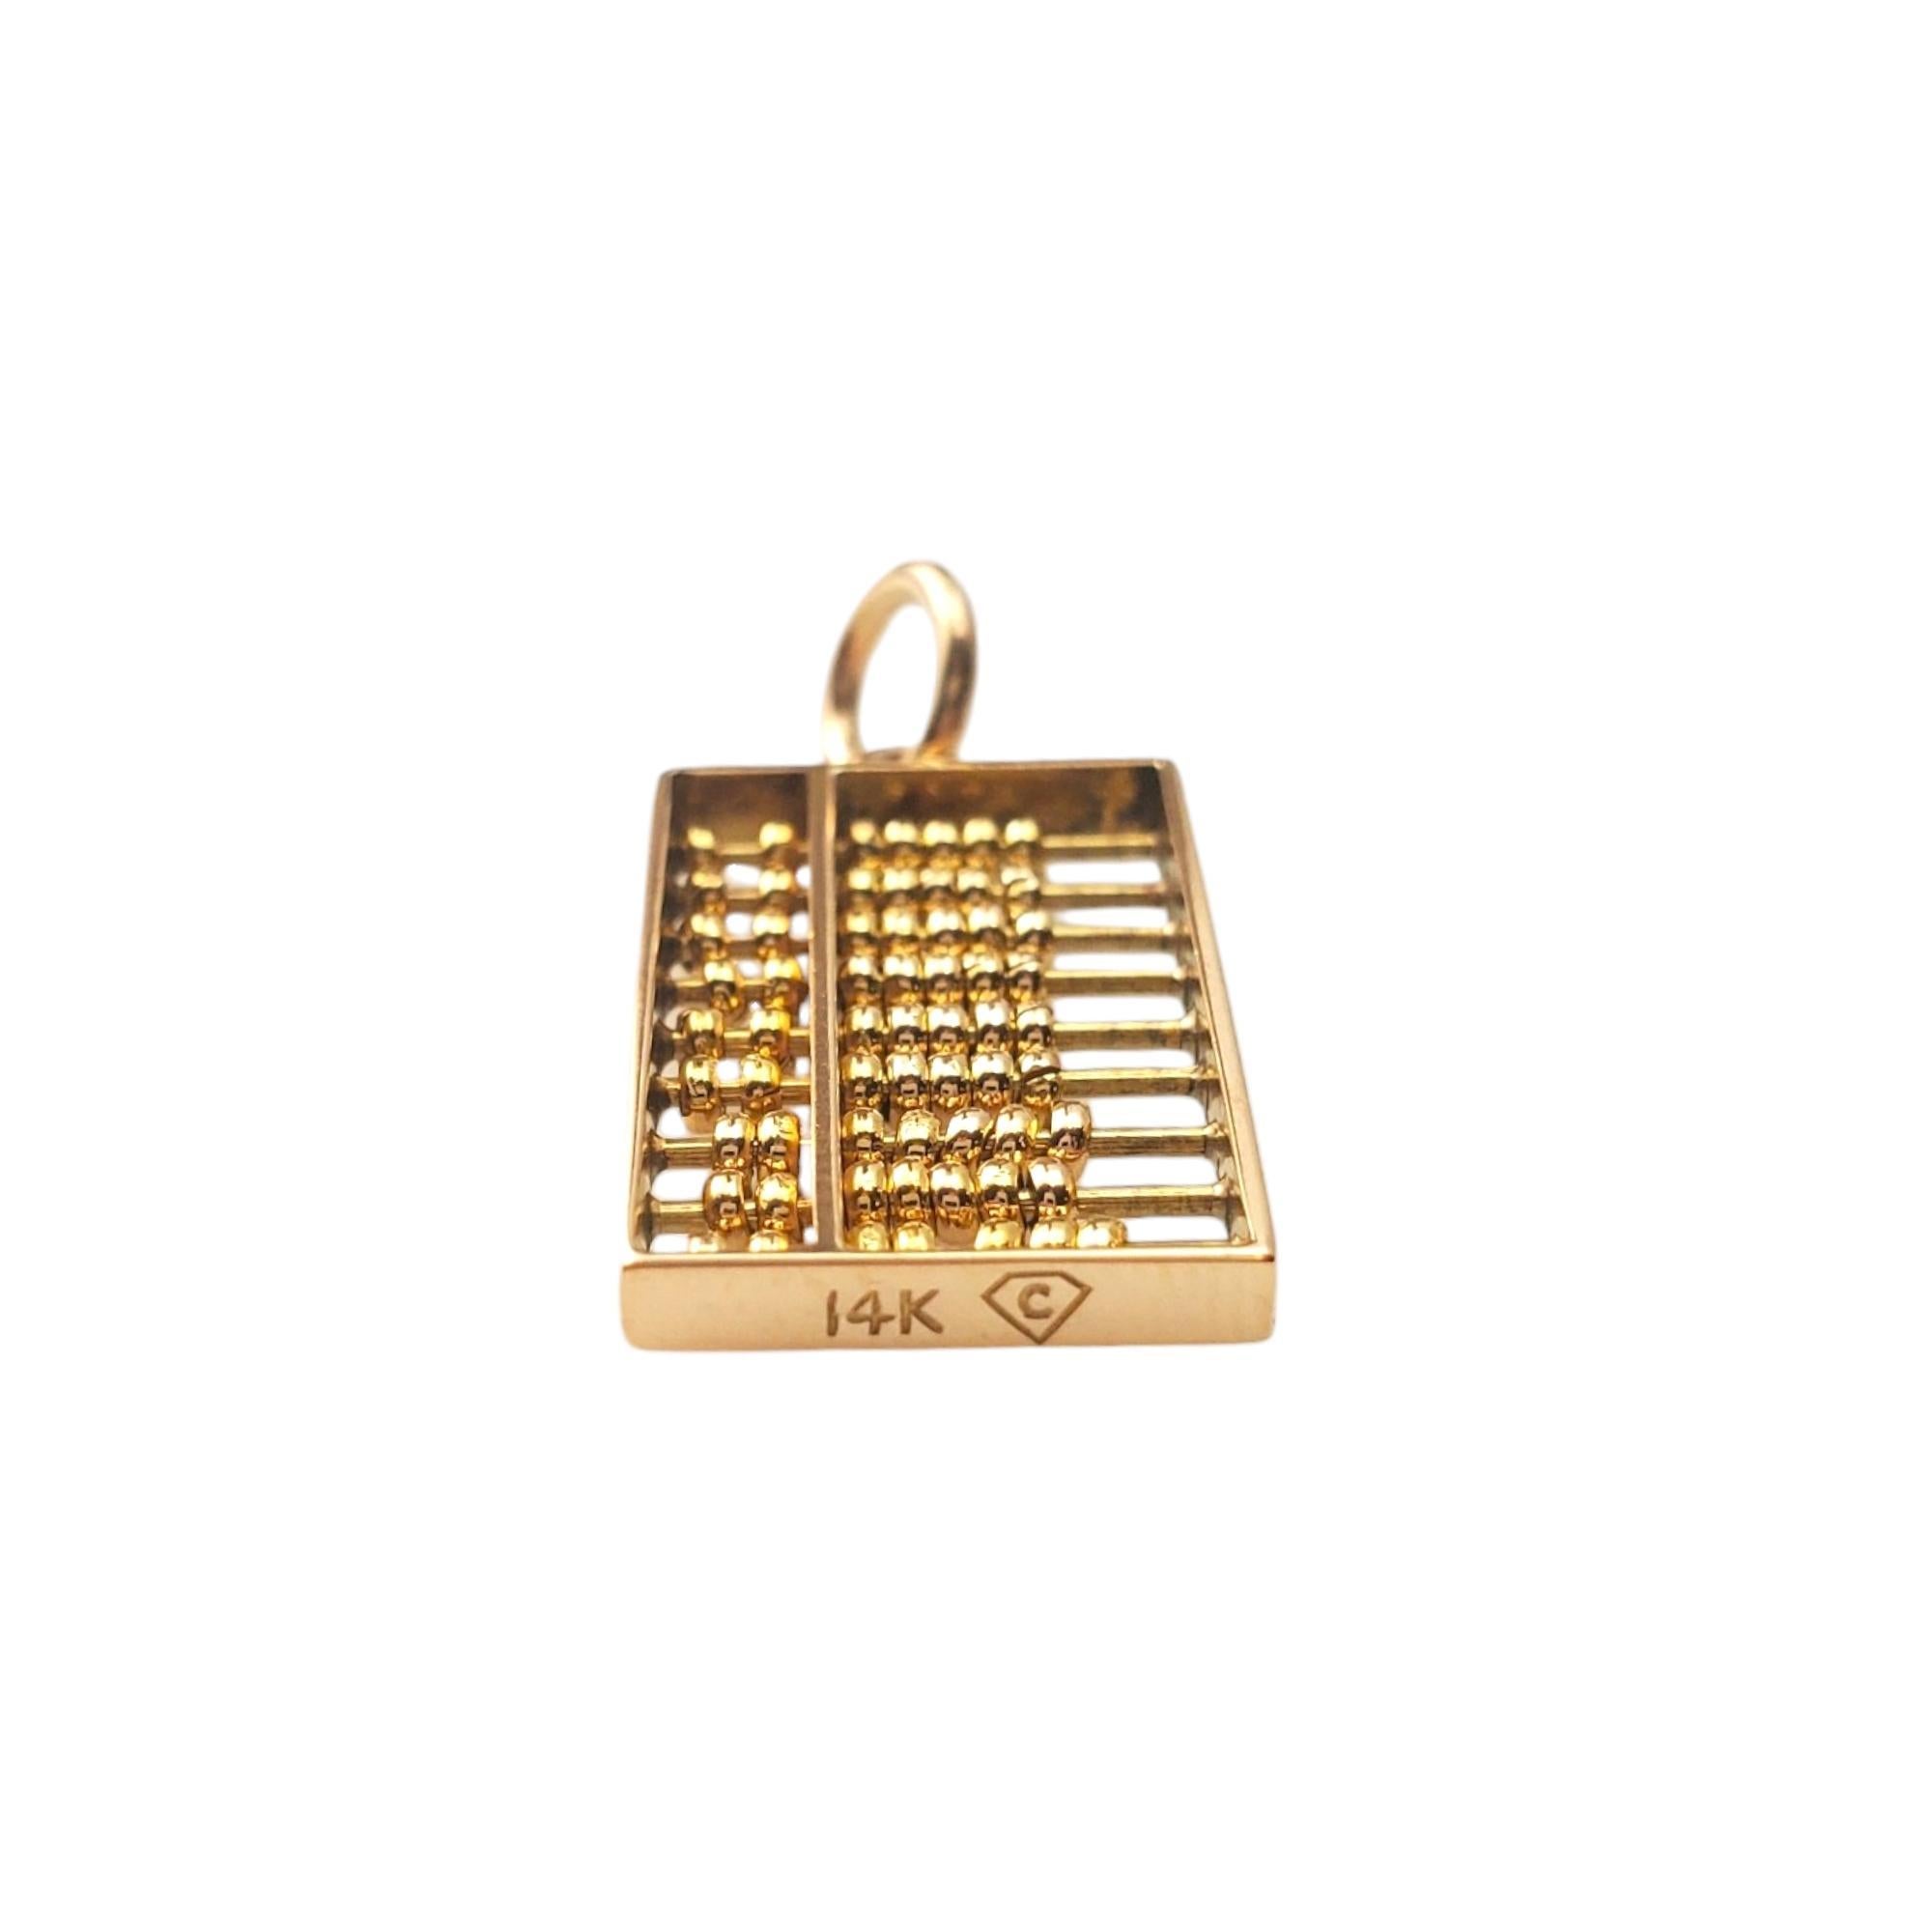 14K Yellow Gold Abacus Charm with Sliding Beads #16599 For Sale 1